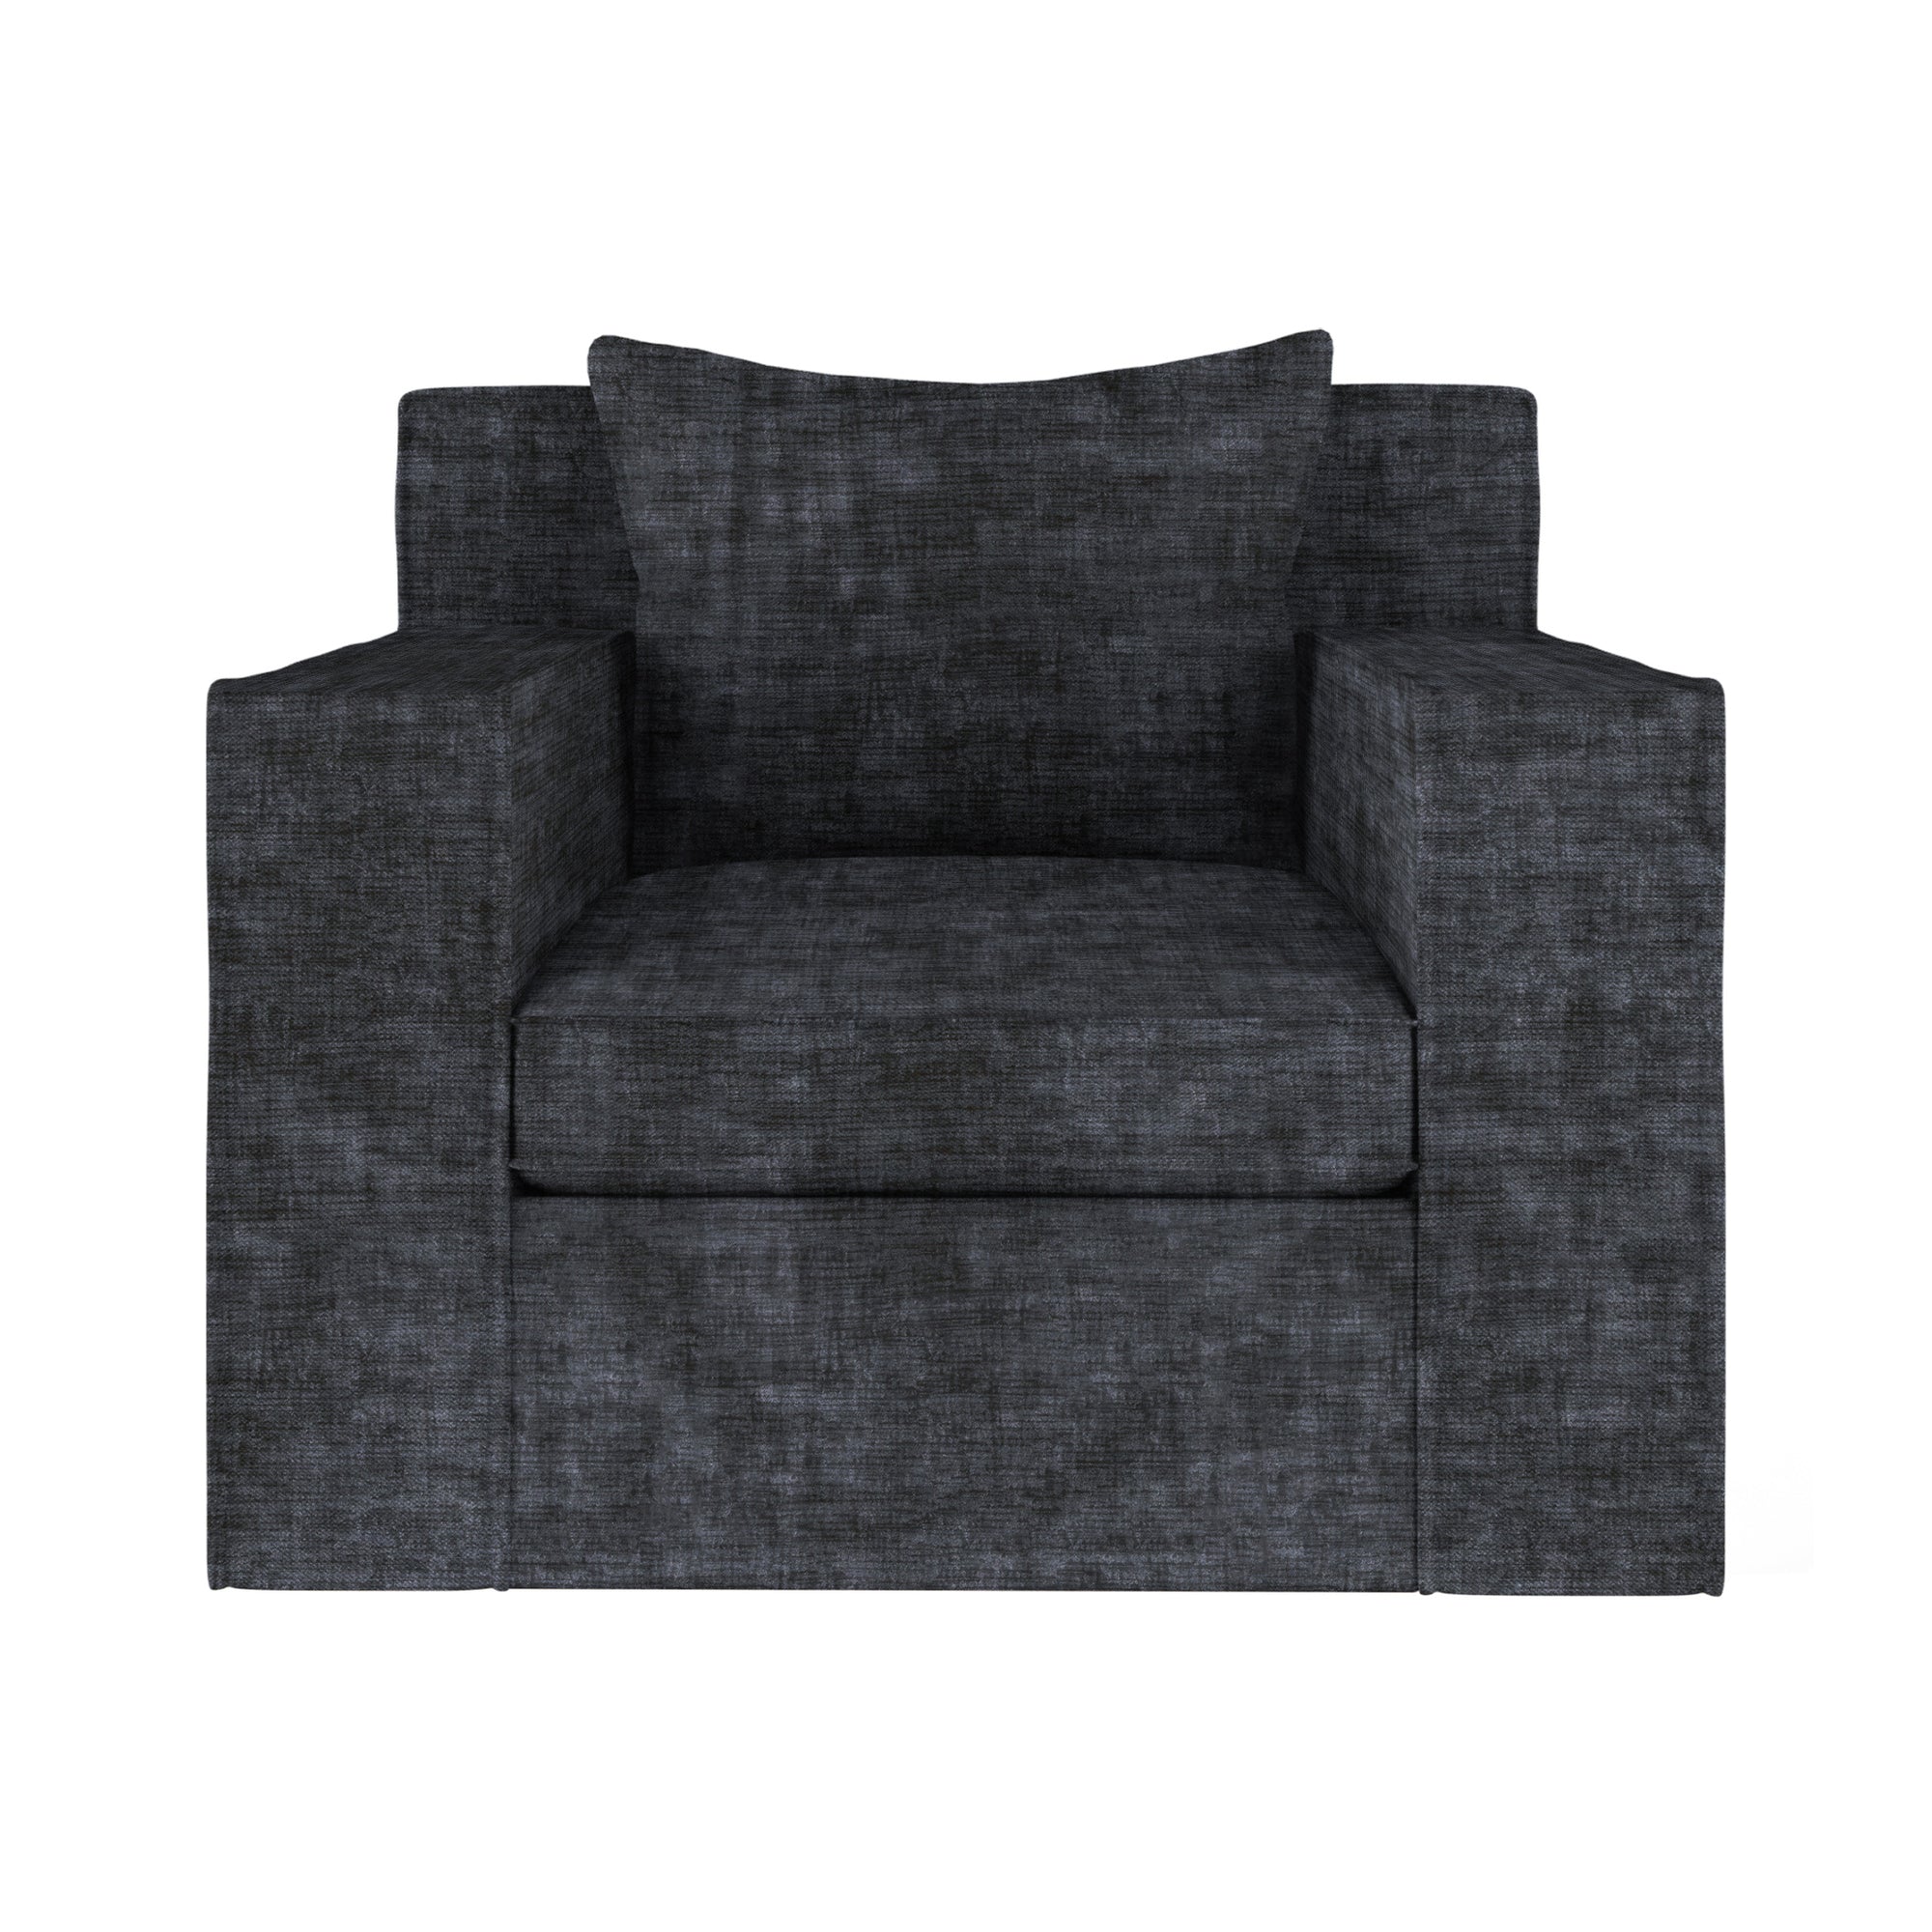 Mulberry Chair - Graphite Crushed Velvet